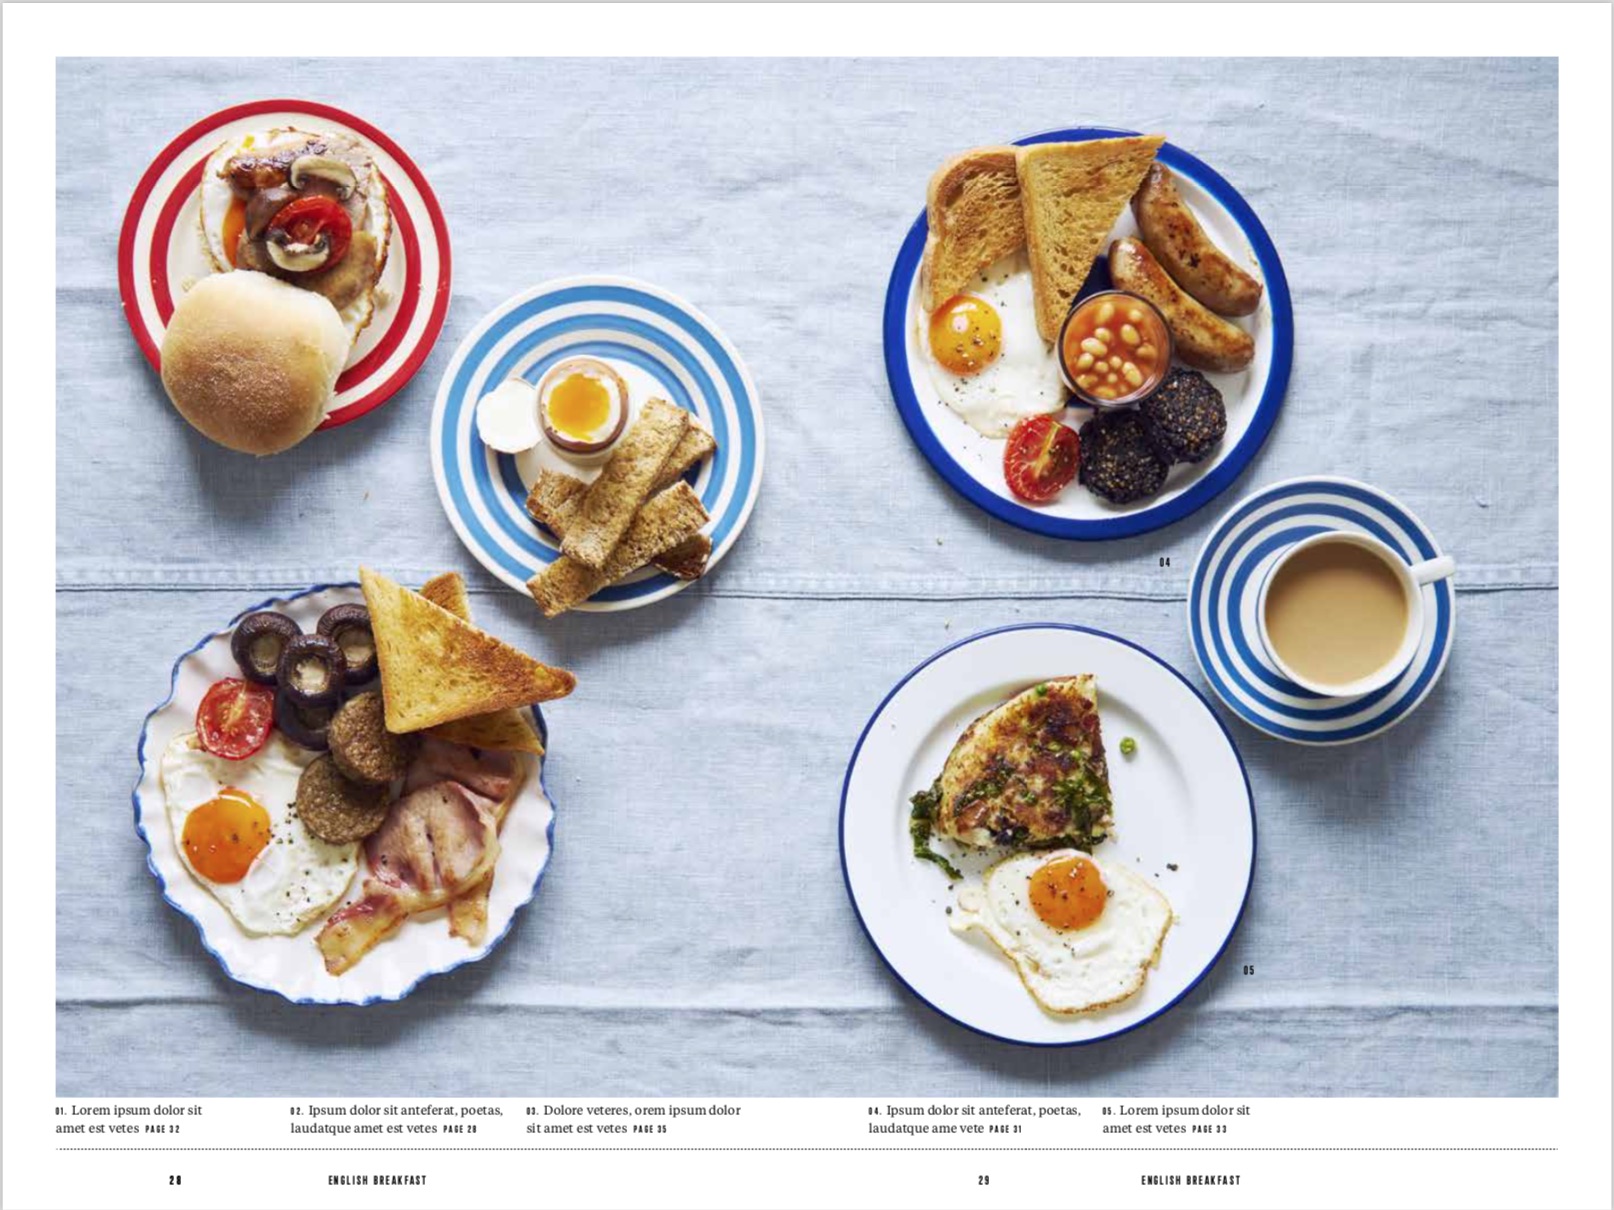 By Emily Elyse Miller from Breakfast: The Cookbook copyright Phaidon 2019